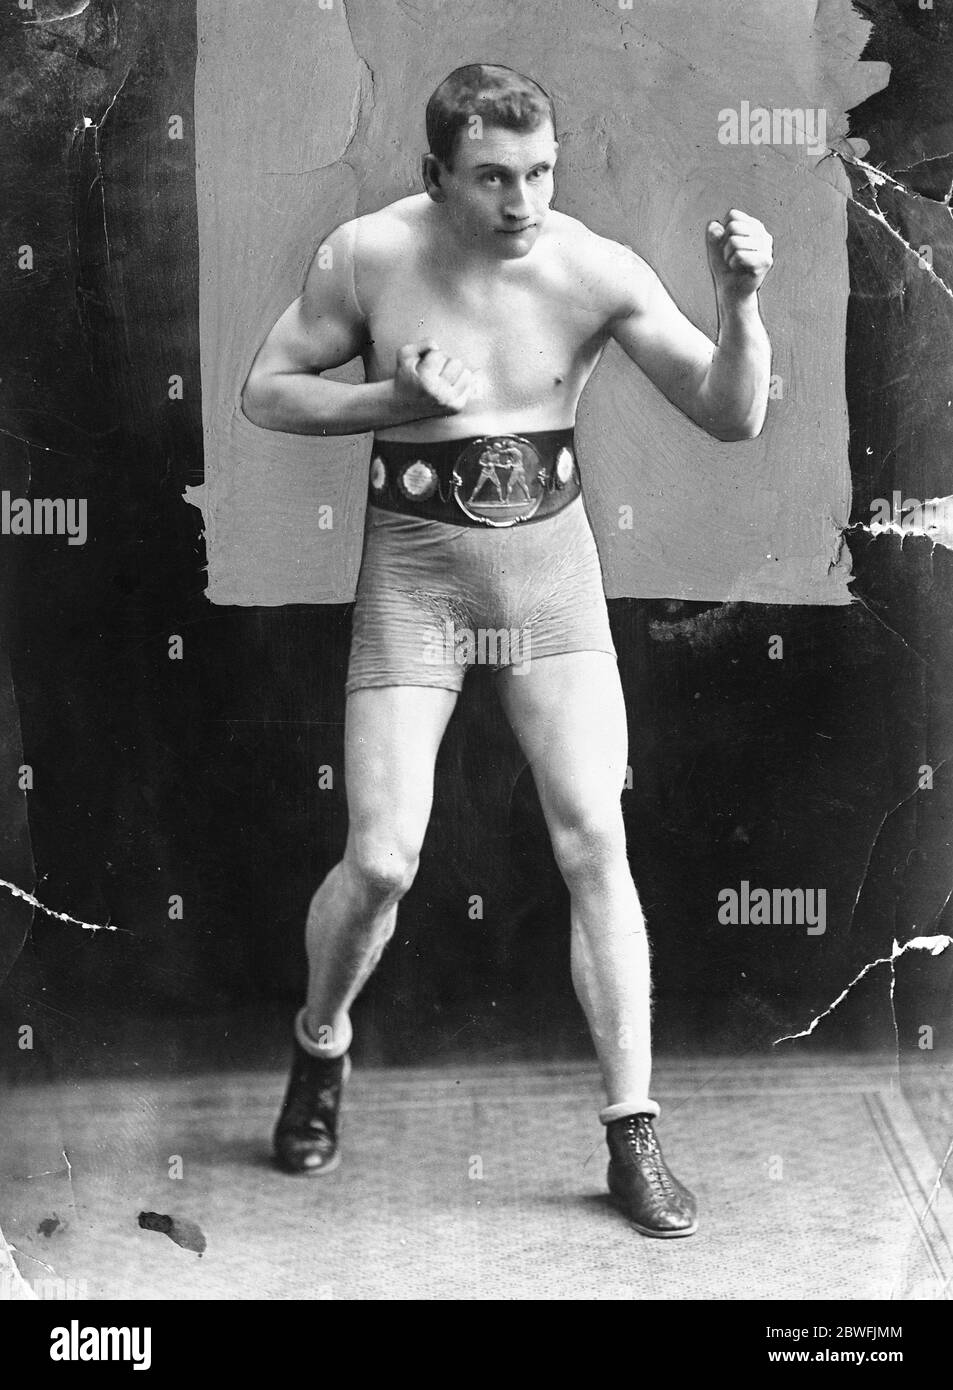 Canadian and Australian Champion meet The busiest part of the boxing season has arrived on Thursday at the Ring London . Soldier Horace Jones , the heavy weight champion of Canada will make his English debut in a 20 round contest against Albert Lloy , the Australian ligght heavy weight champion ( Horace Jones ) 29 March 1922 Stock Photo